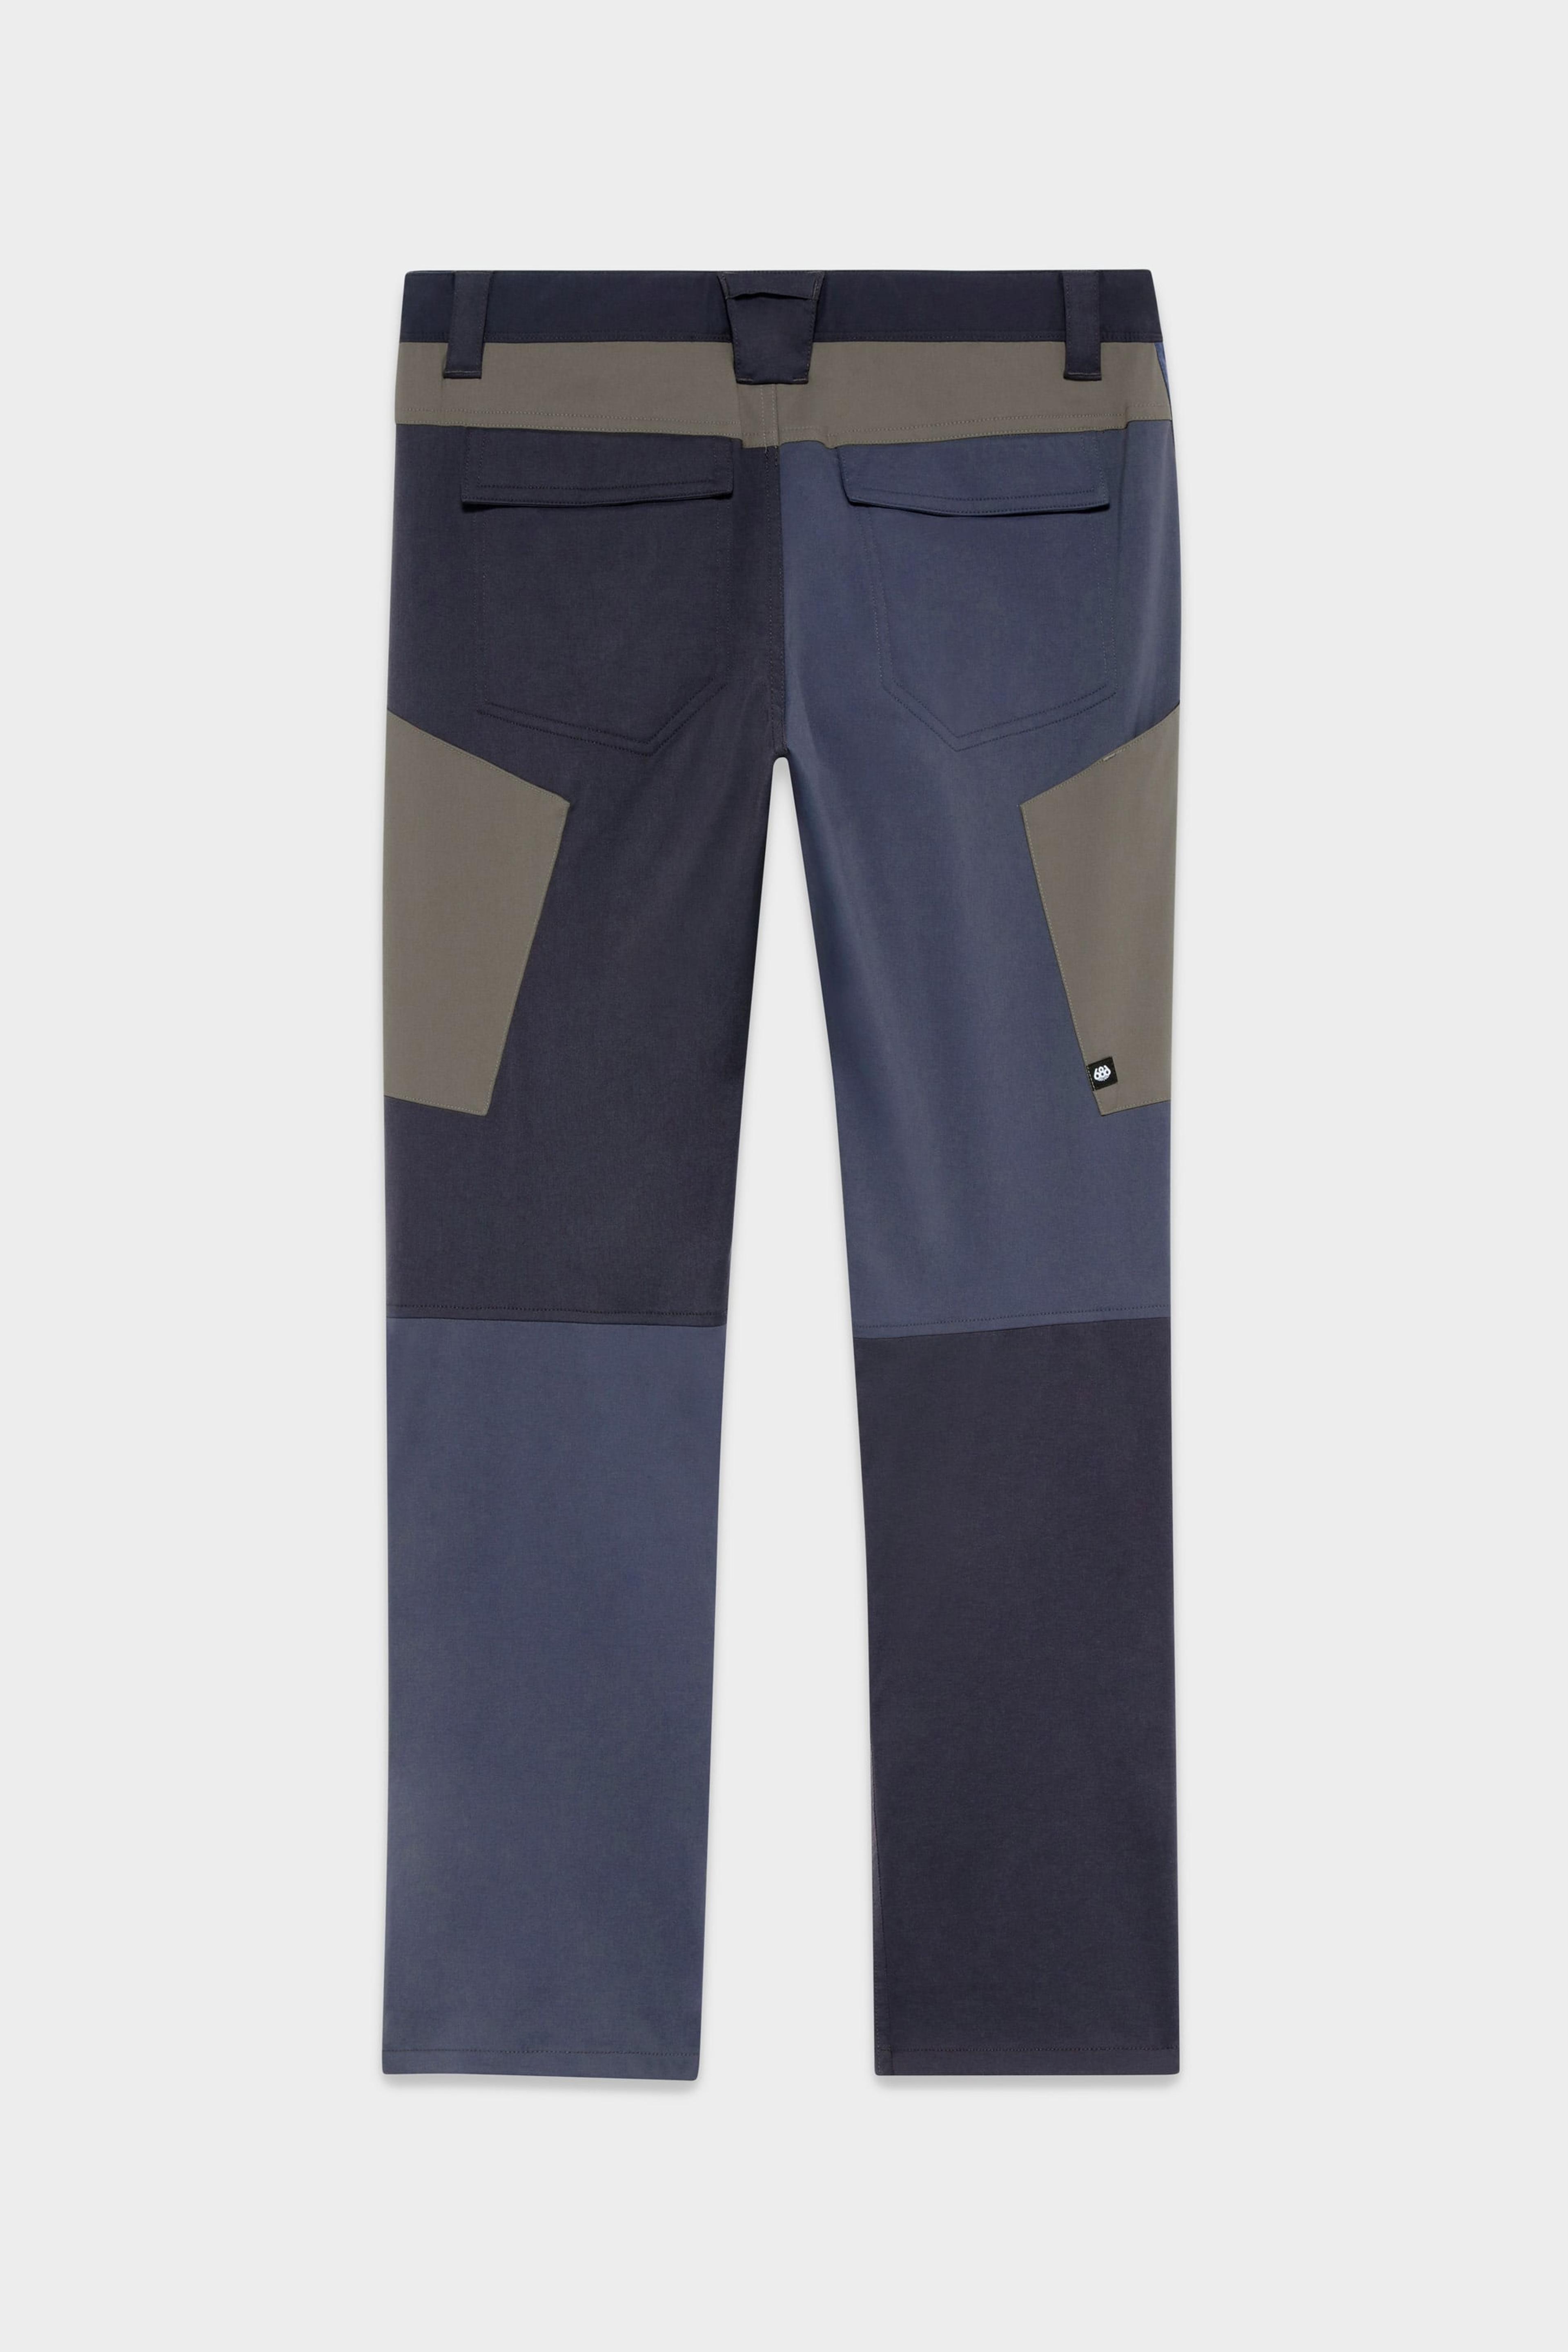 Alternate View 26 of 686 Men's Anything Cargo Pant - Slim Fit